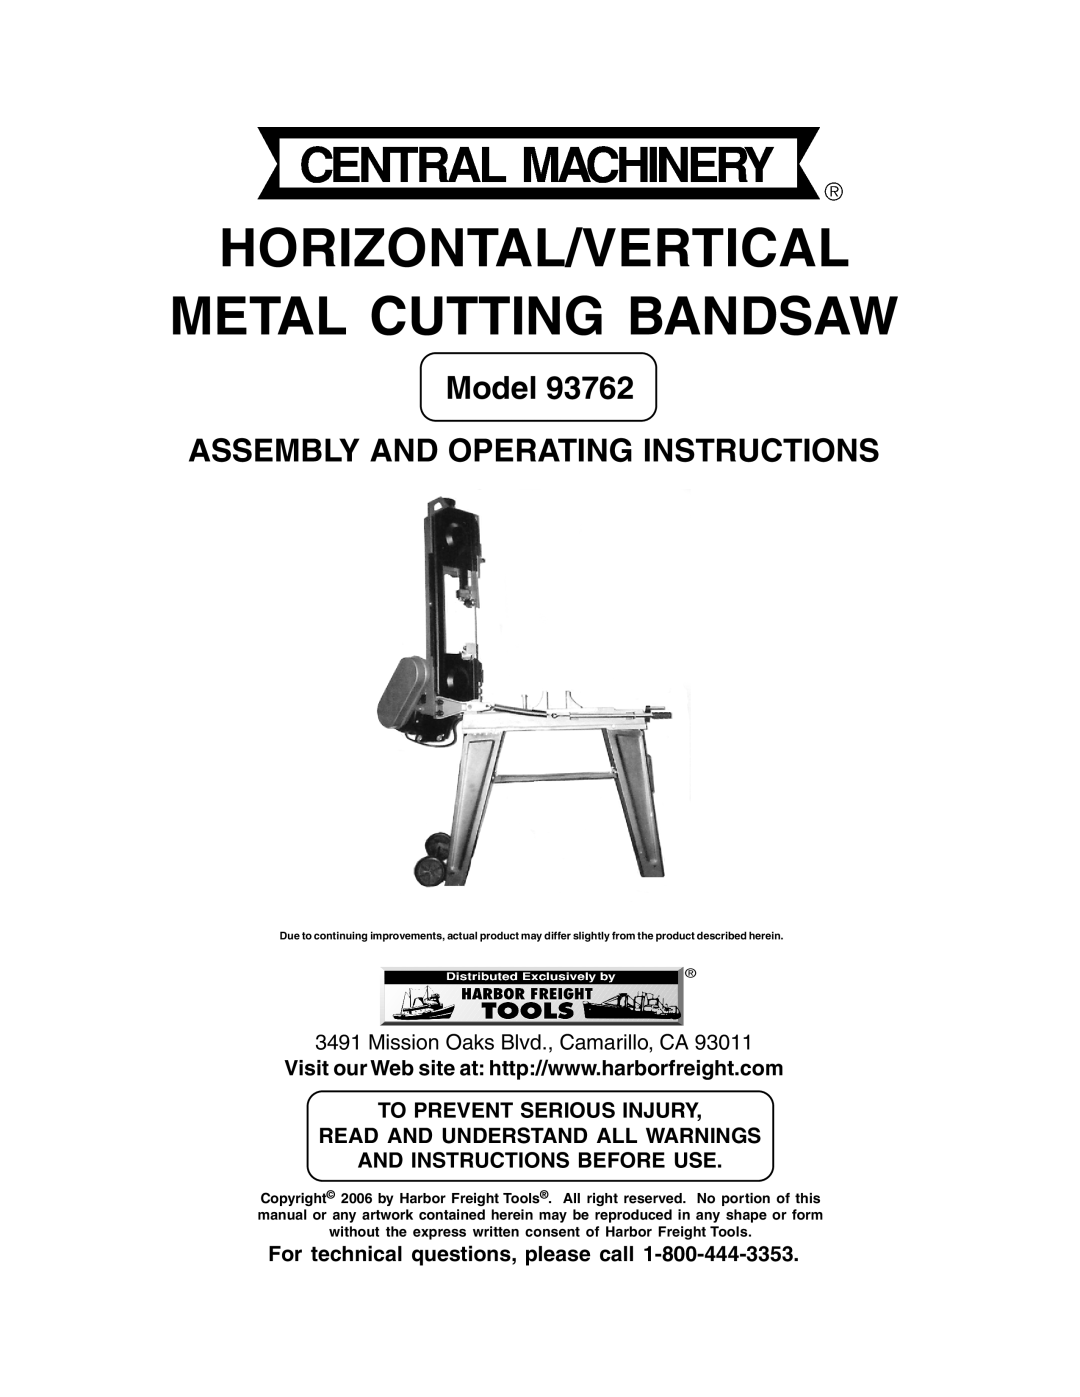 Harbor Freight Tools 93762 operating instructions horizontal/vertical metal cutting bandsaw, Model 